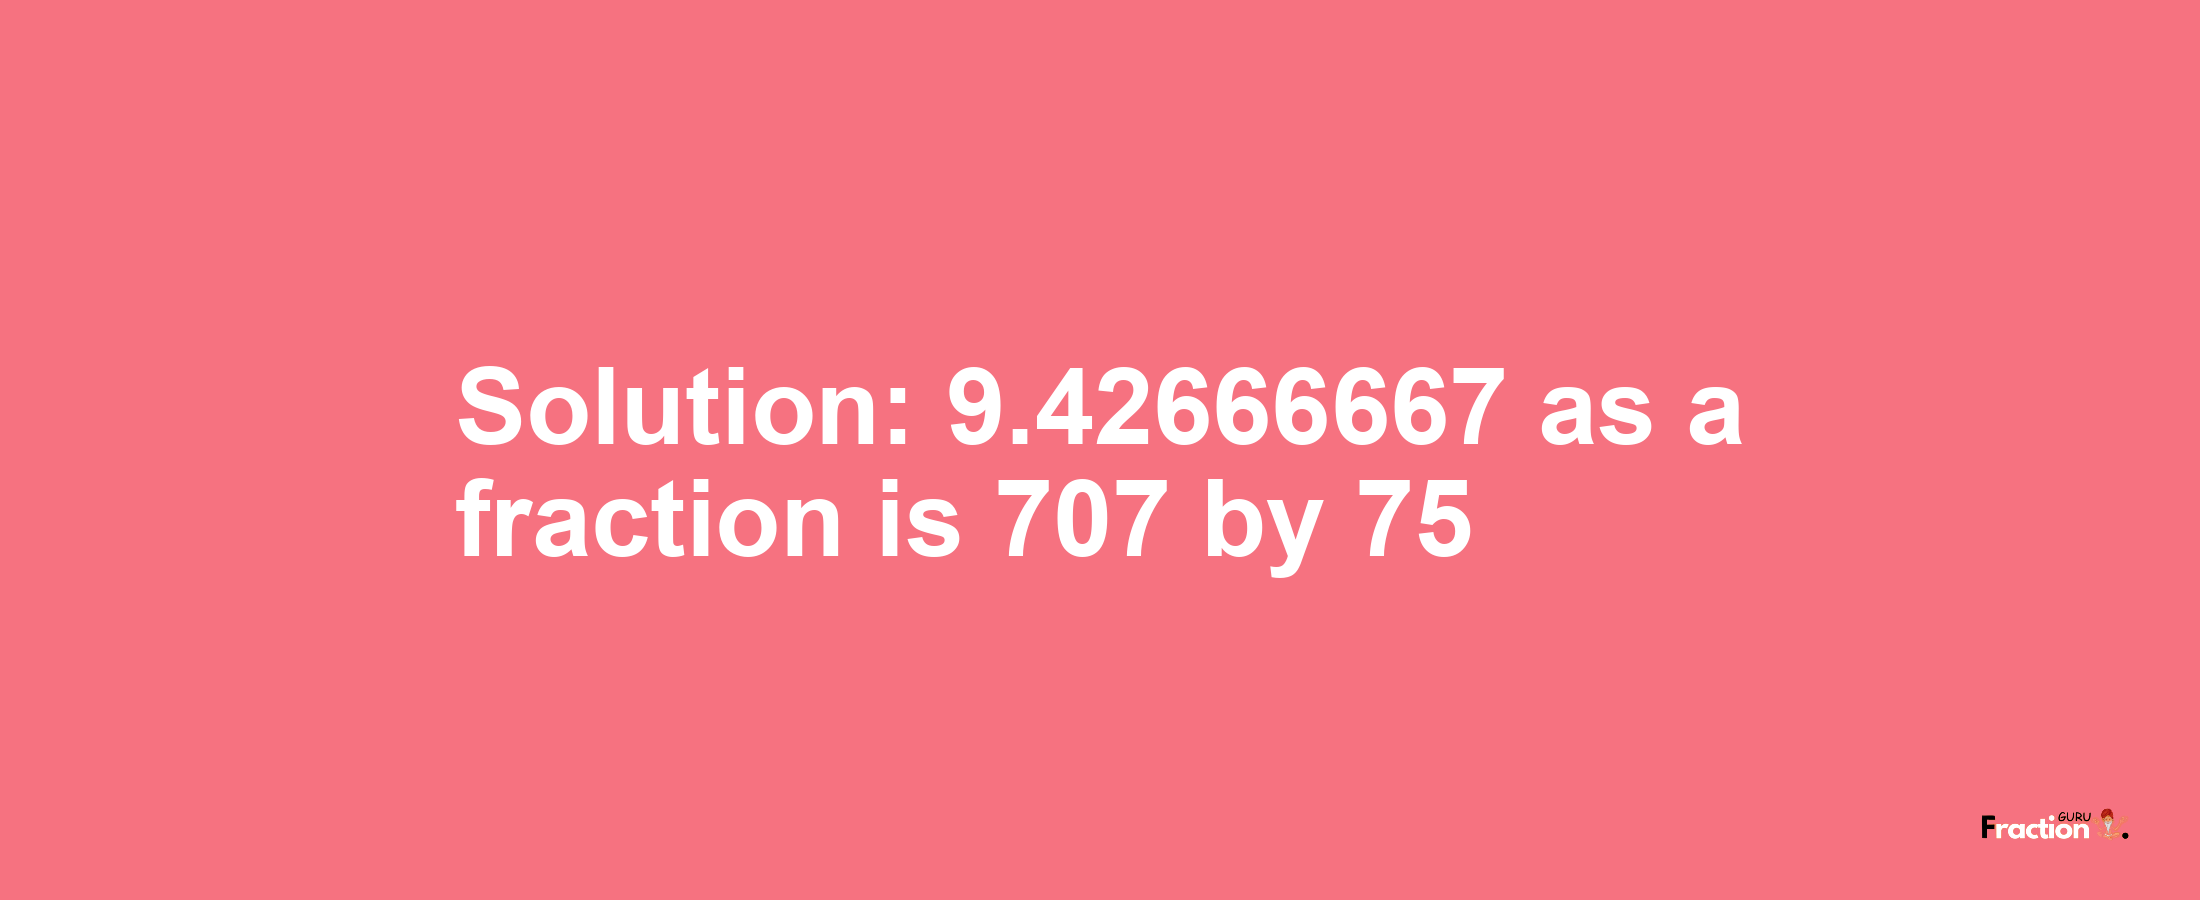 Solution:9.42666667 as a fraction is 707/75